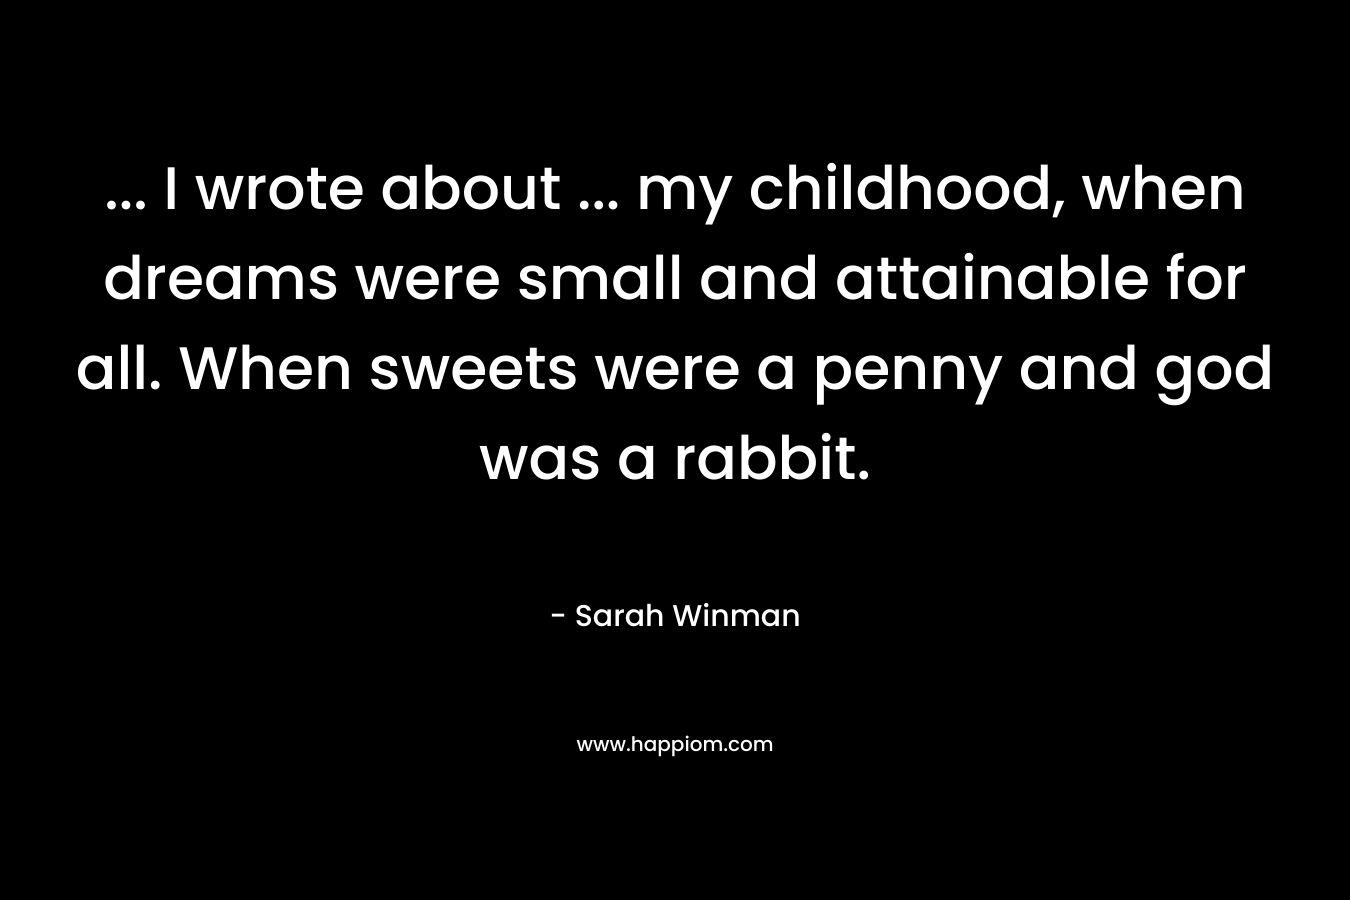 … I wrote about … my childhood, when dreams were small and attainable for all. When sweets were a penny and god was a rabbit. – Sarah Winman